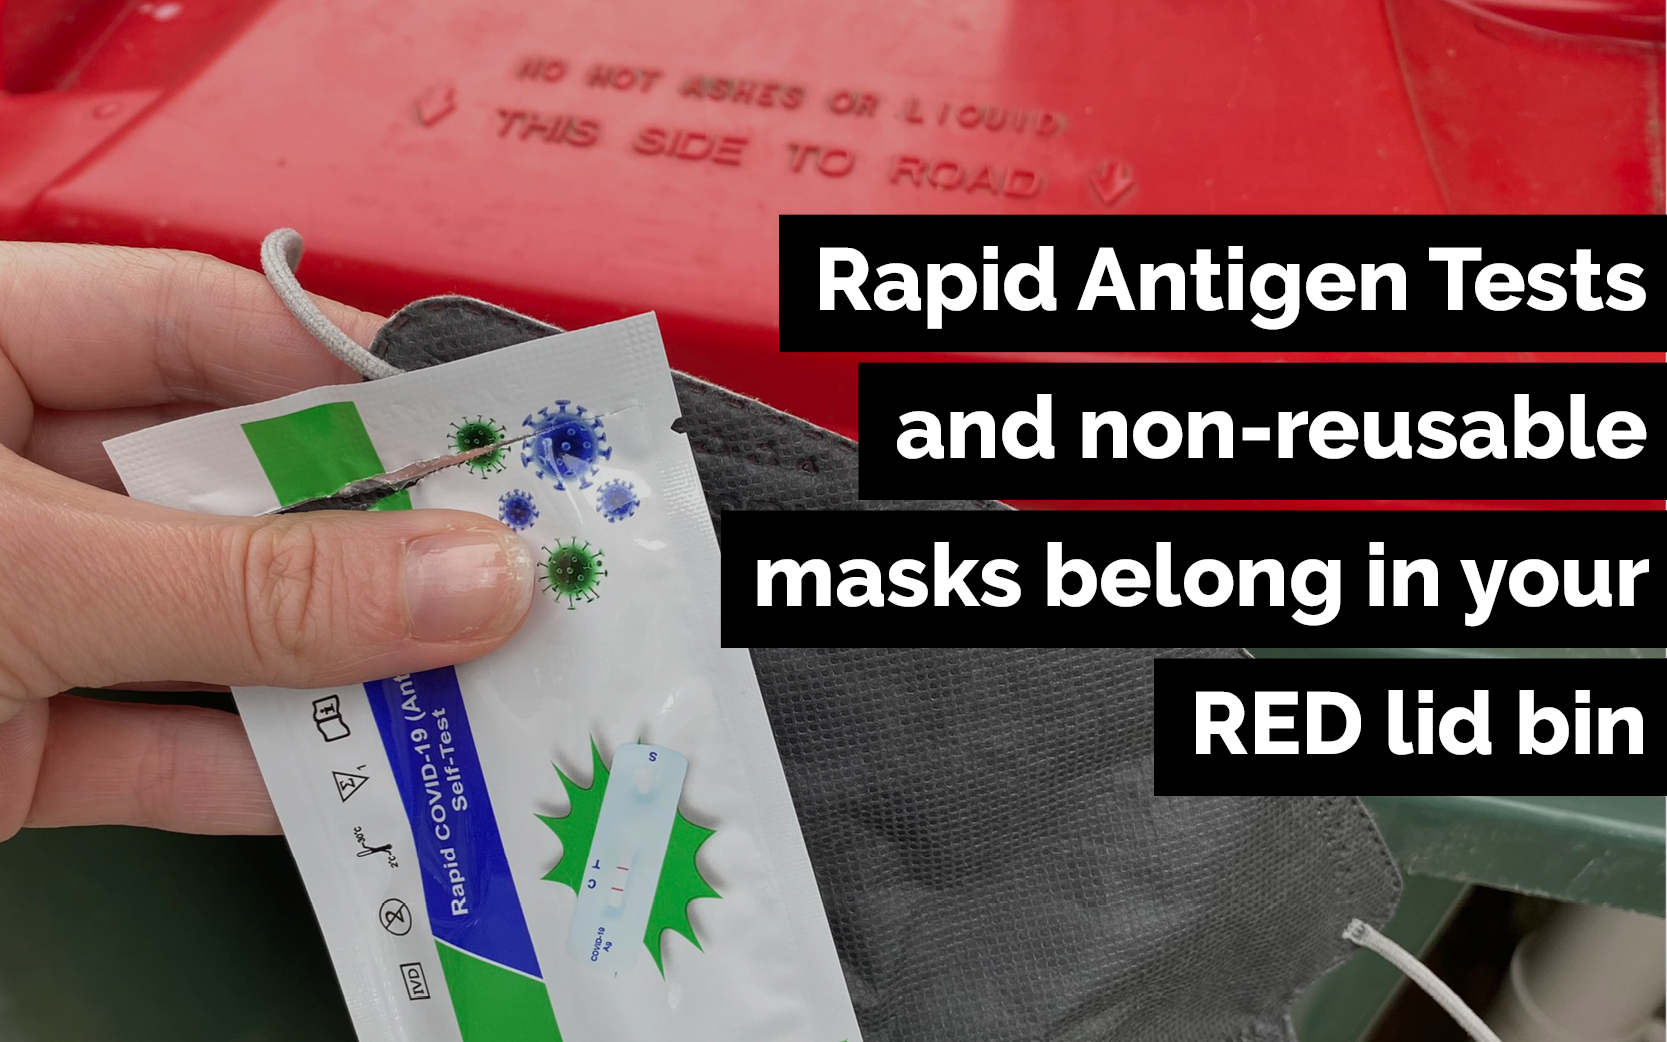 Covid-19 tests and masks belong in your red lid bin